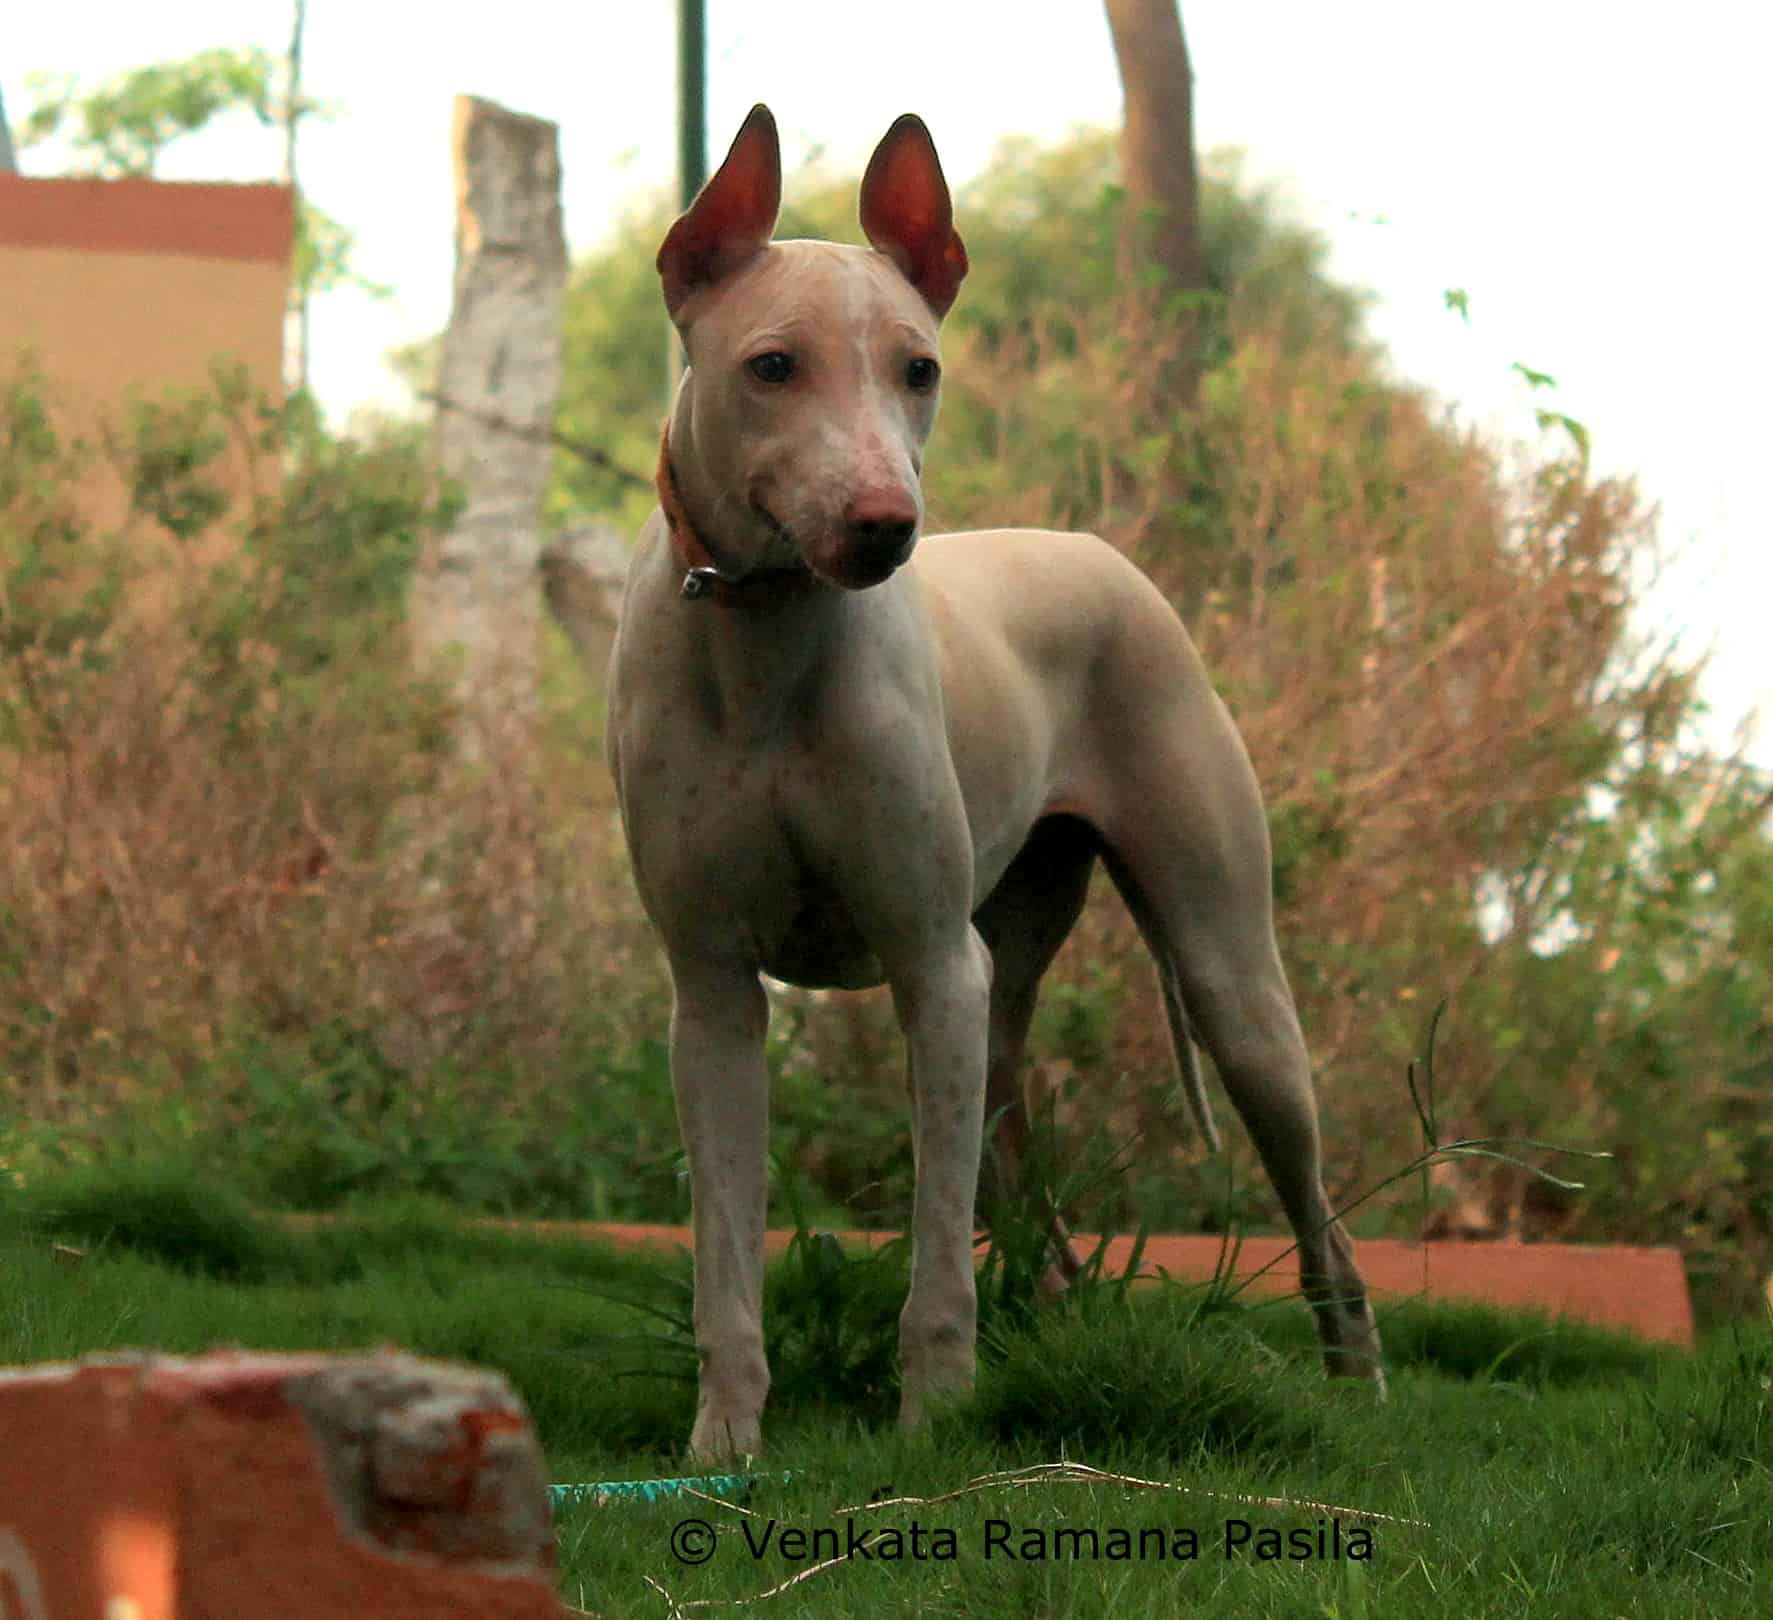 Jonangi dogs originate from India and are considered to be excellent hunting dogs.